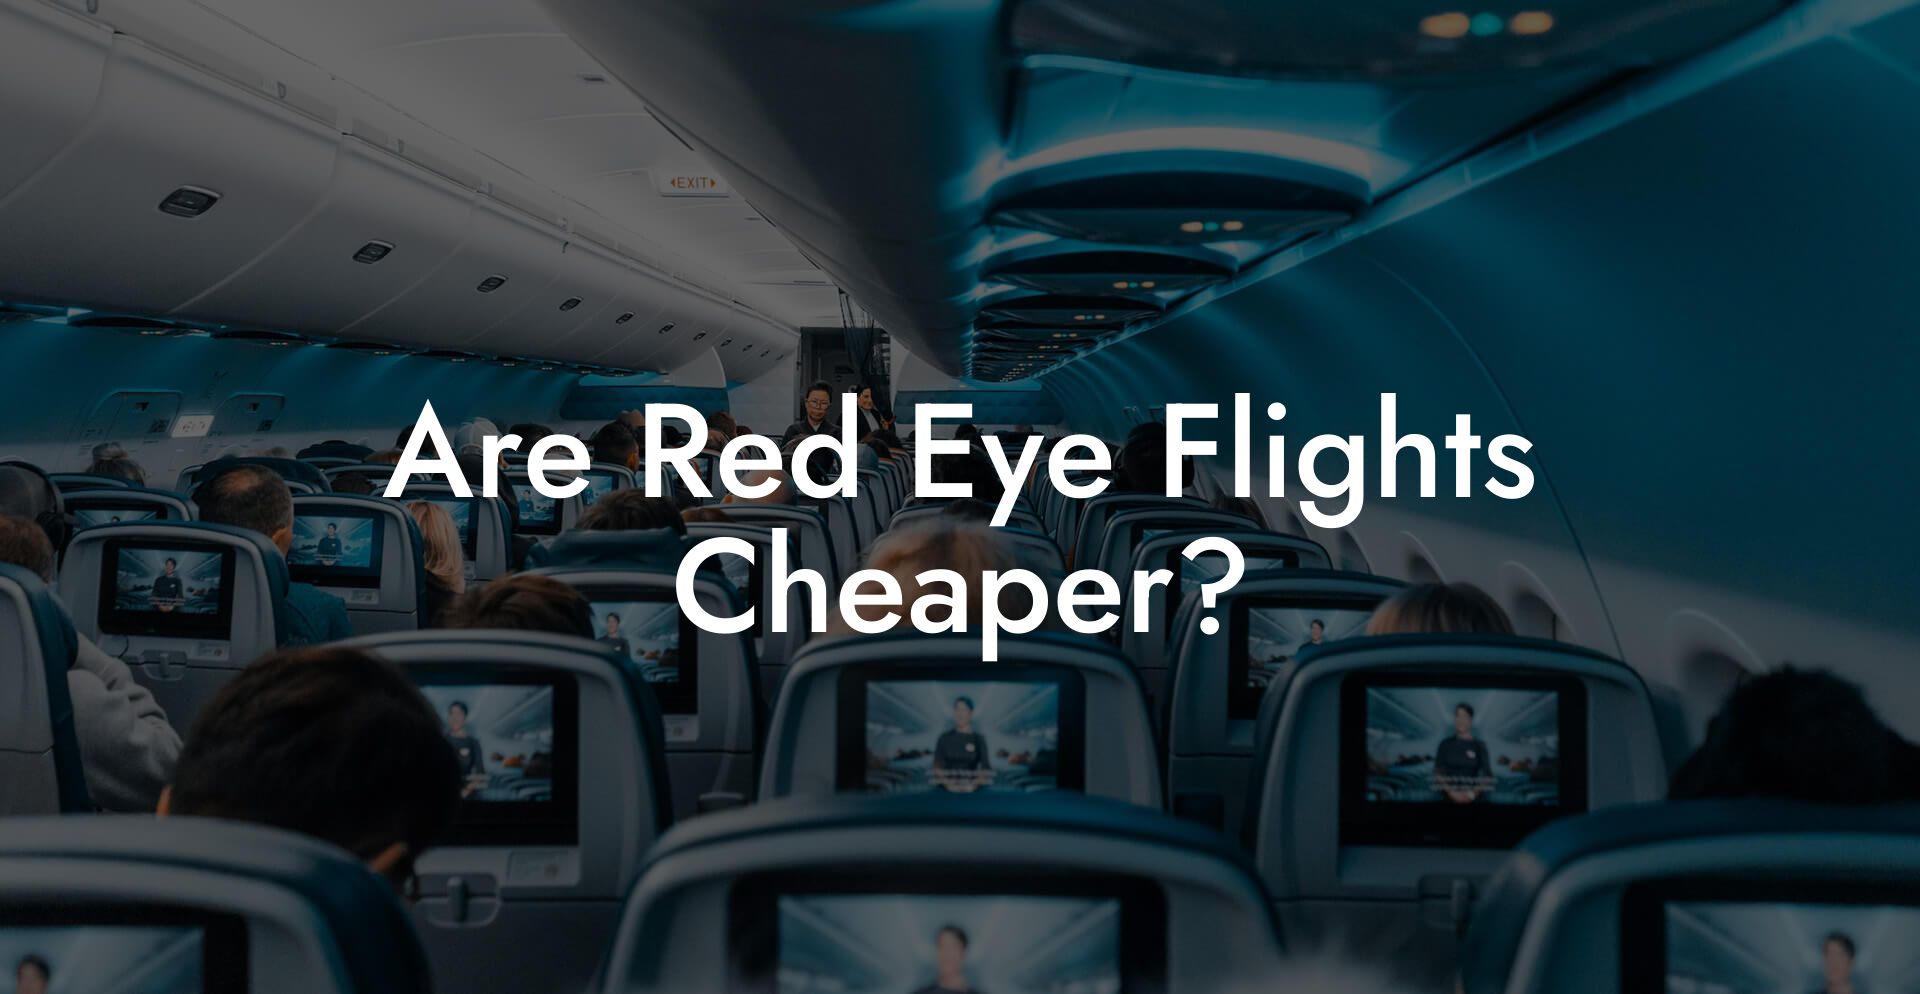 Are Red Eye Flights Cheaper?